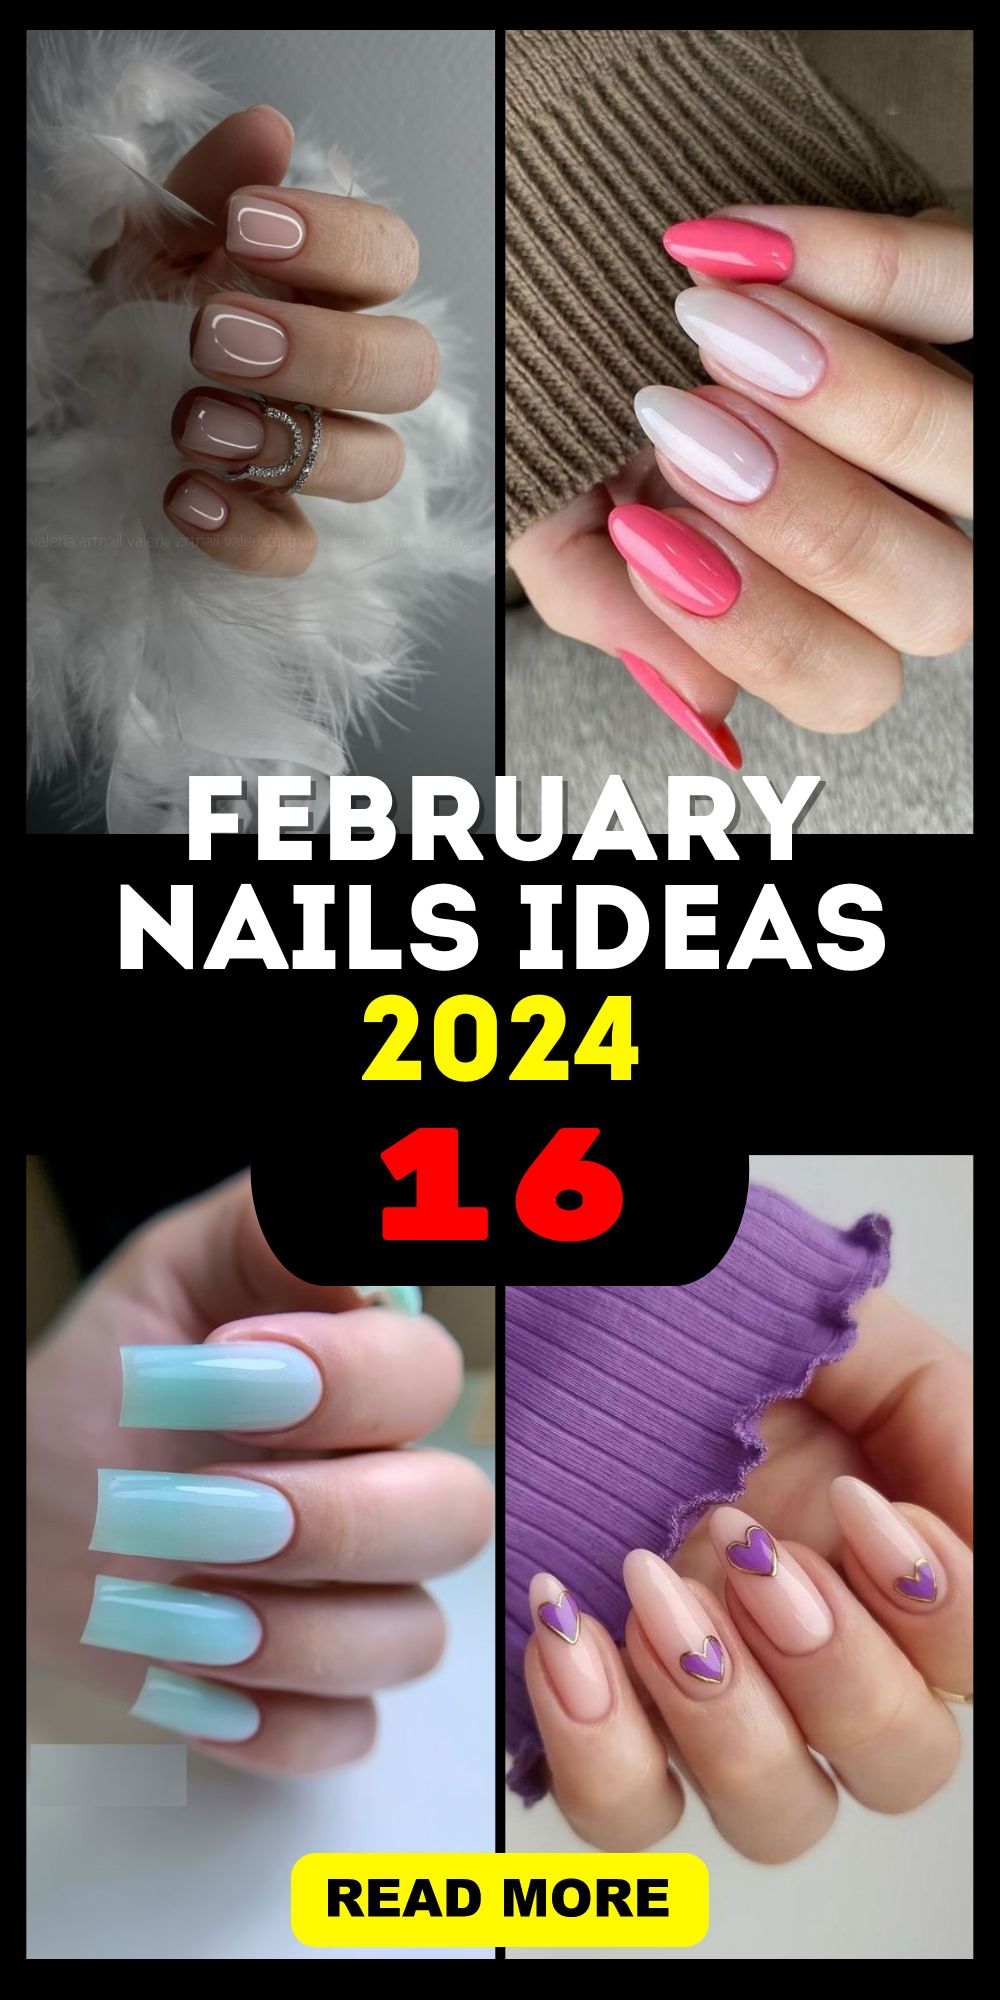 Valentine's Day 2024 Nail Trends: Stylish February Manicure Ideas